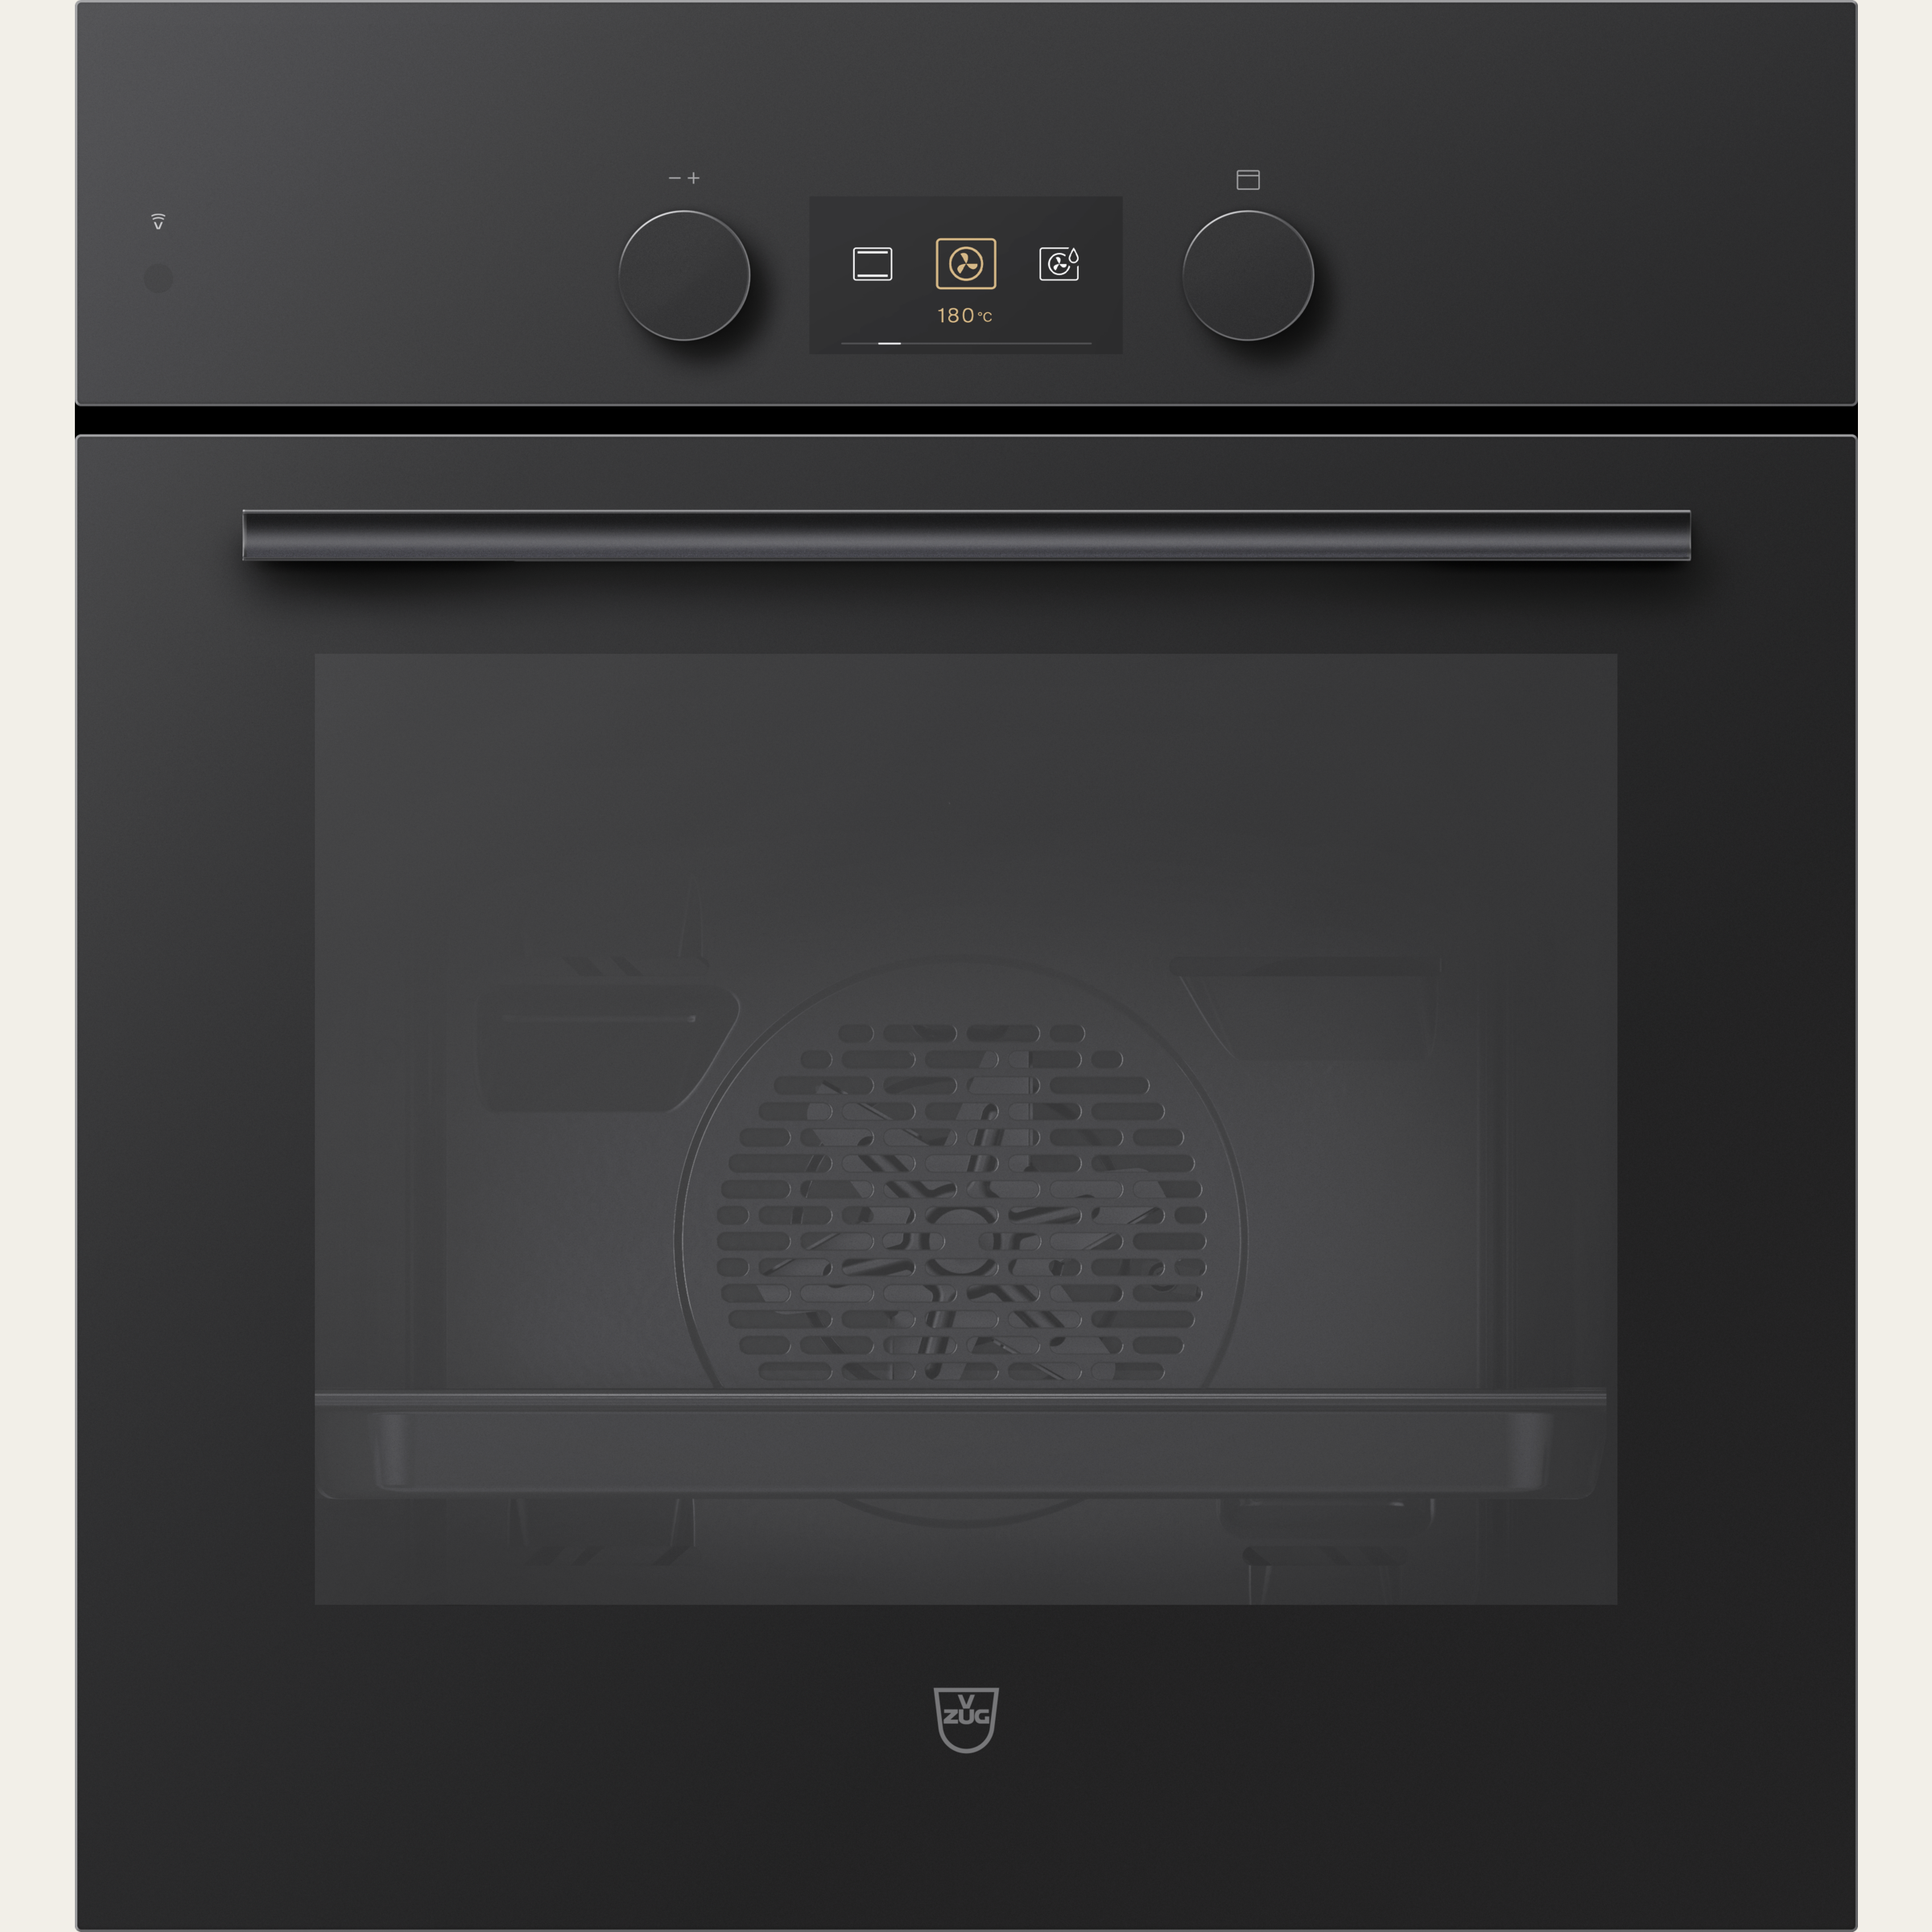 V-ZUG Oven Combair V600 6UC, Standard width: 55 cm, Standard height: 60 cm, Nero with glass, Nero, Installation in floor unit, dial, V-ZUG-Home, TopClean, 400V